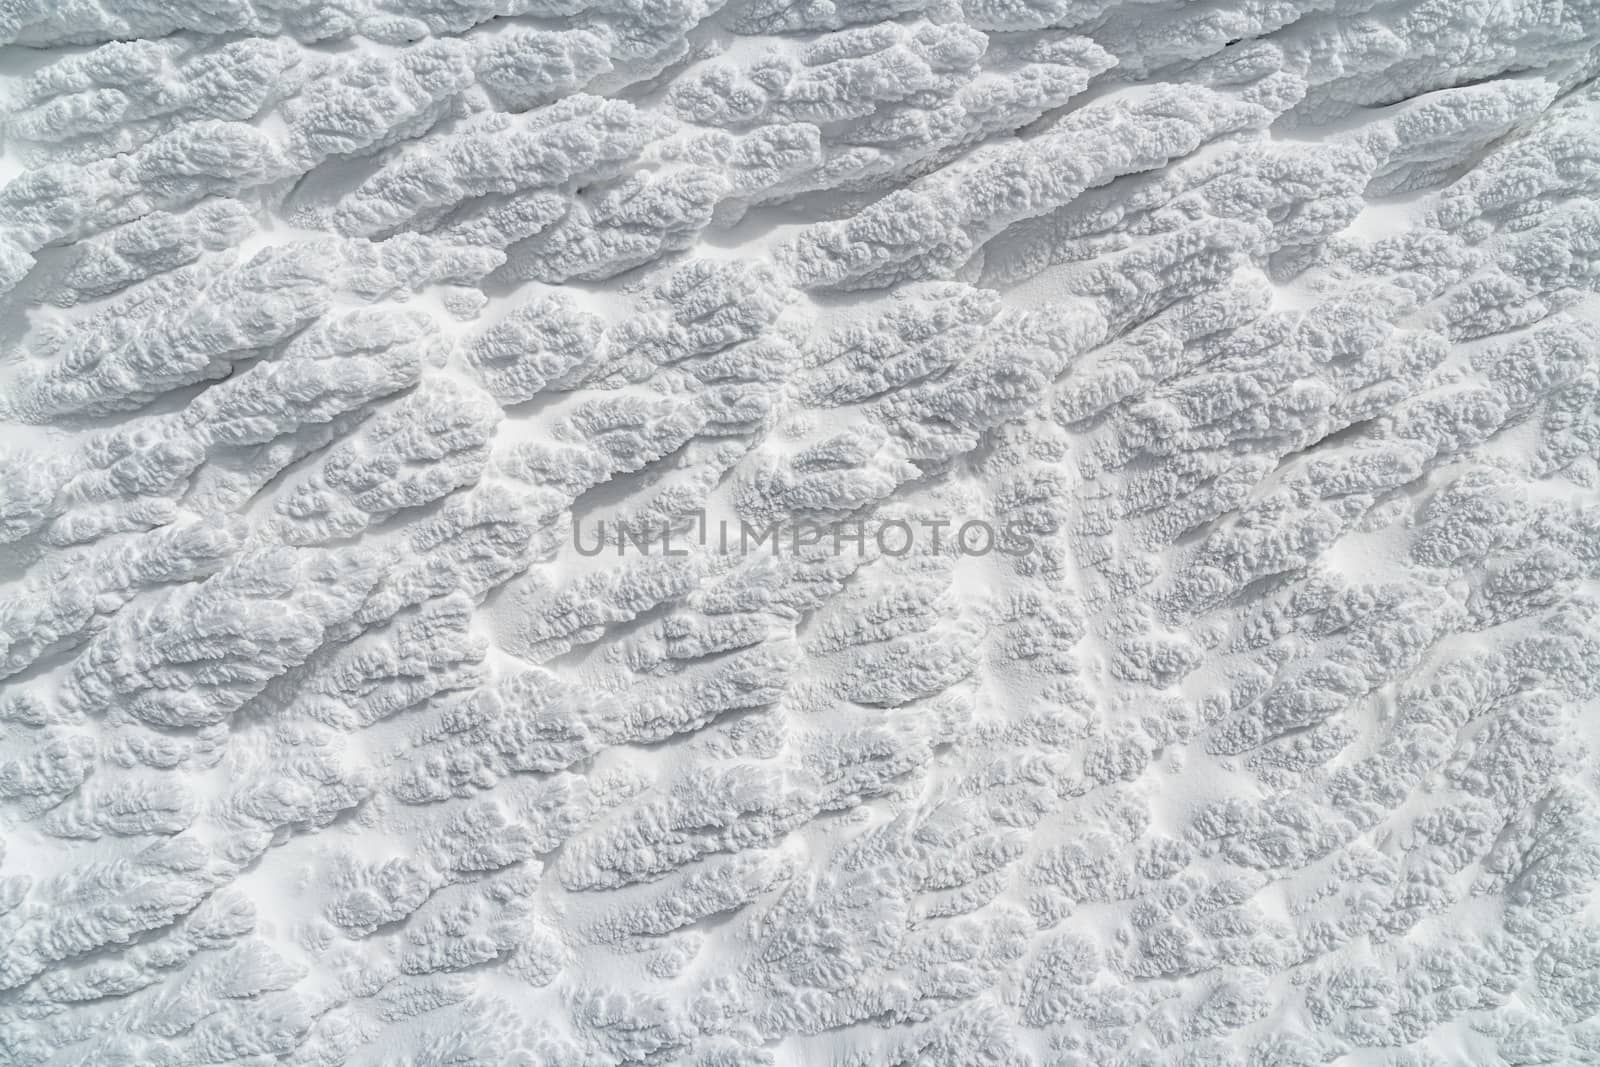 Icy texture of snow after a blizzard on a windy morning. by petrsvoboda91